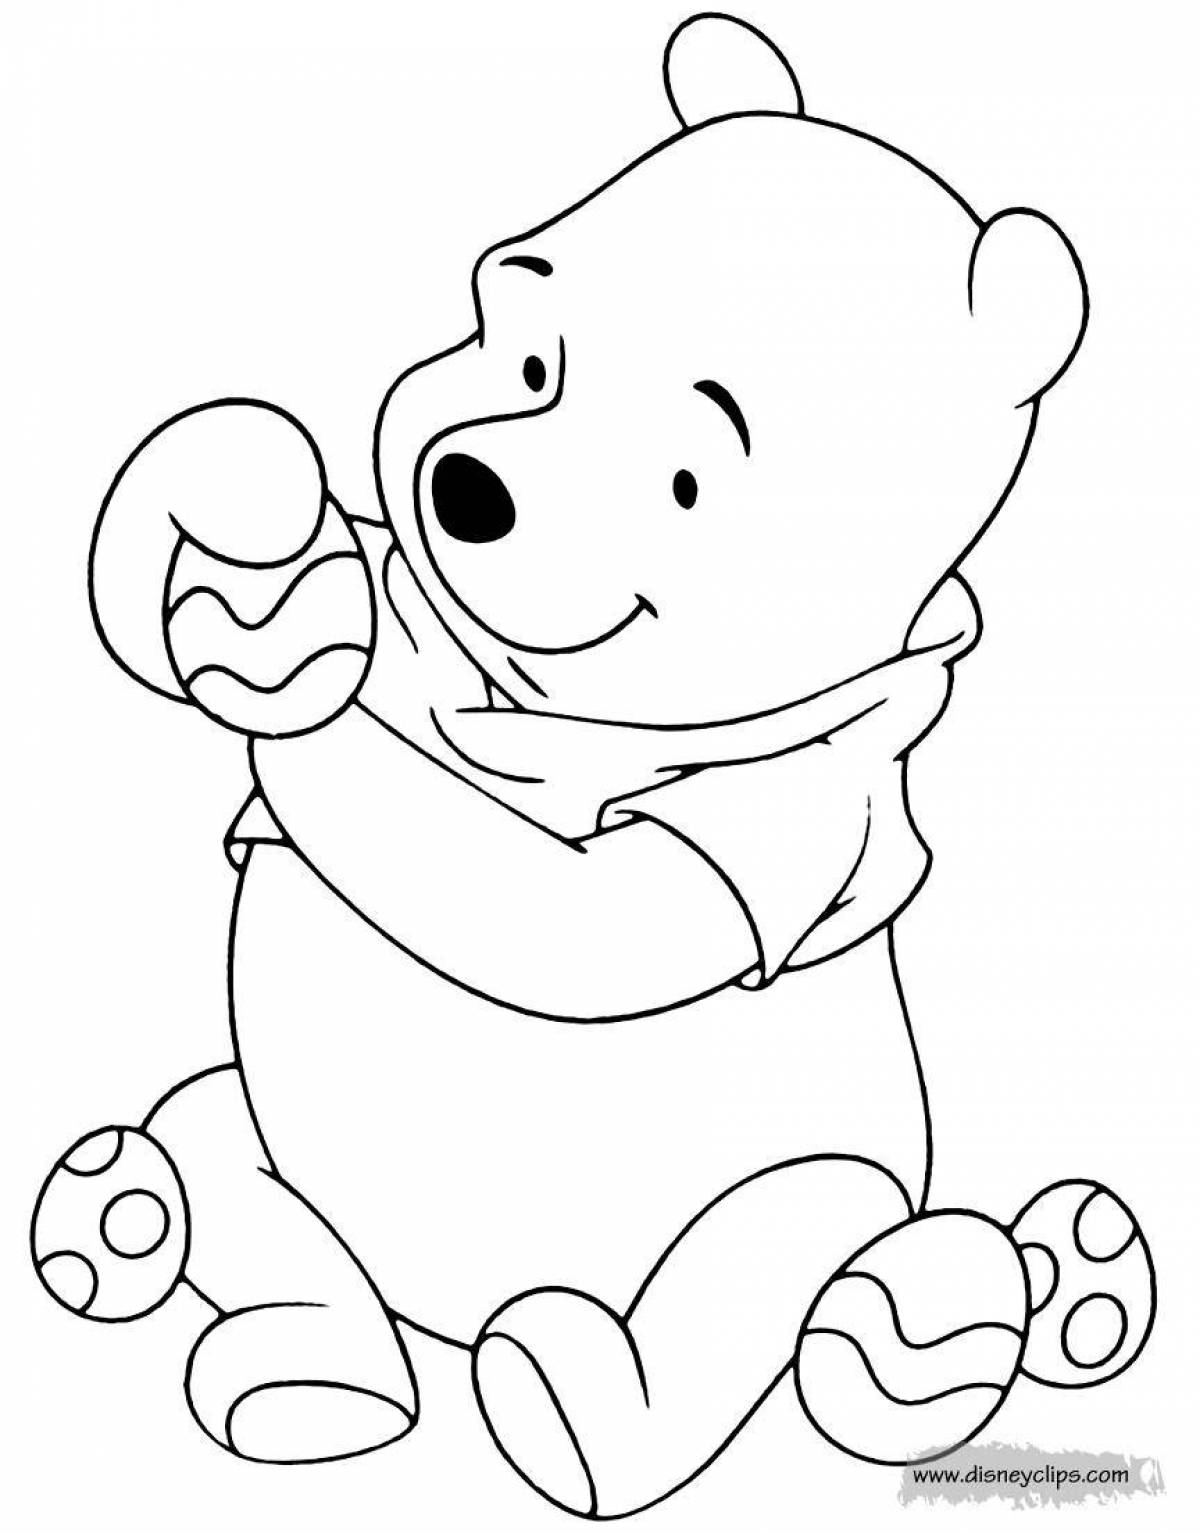 Winnie the pooh with balloon #3